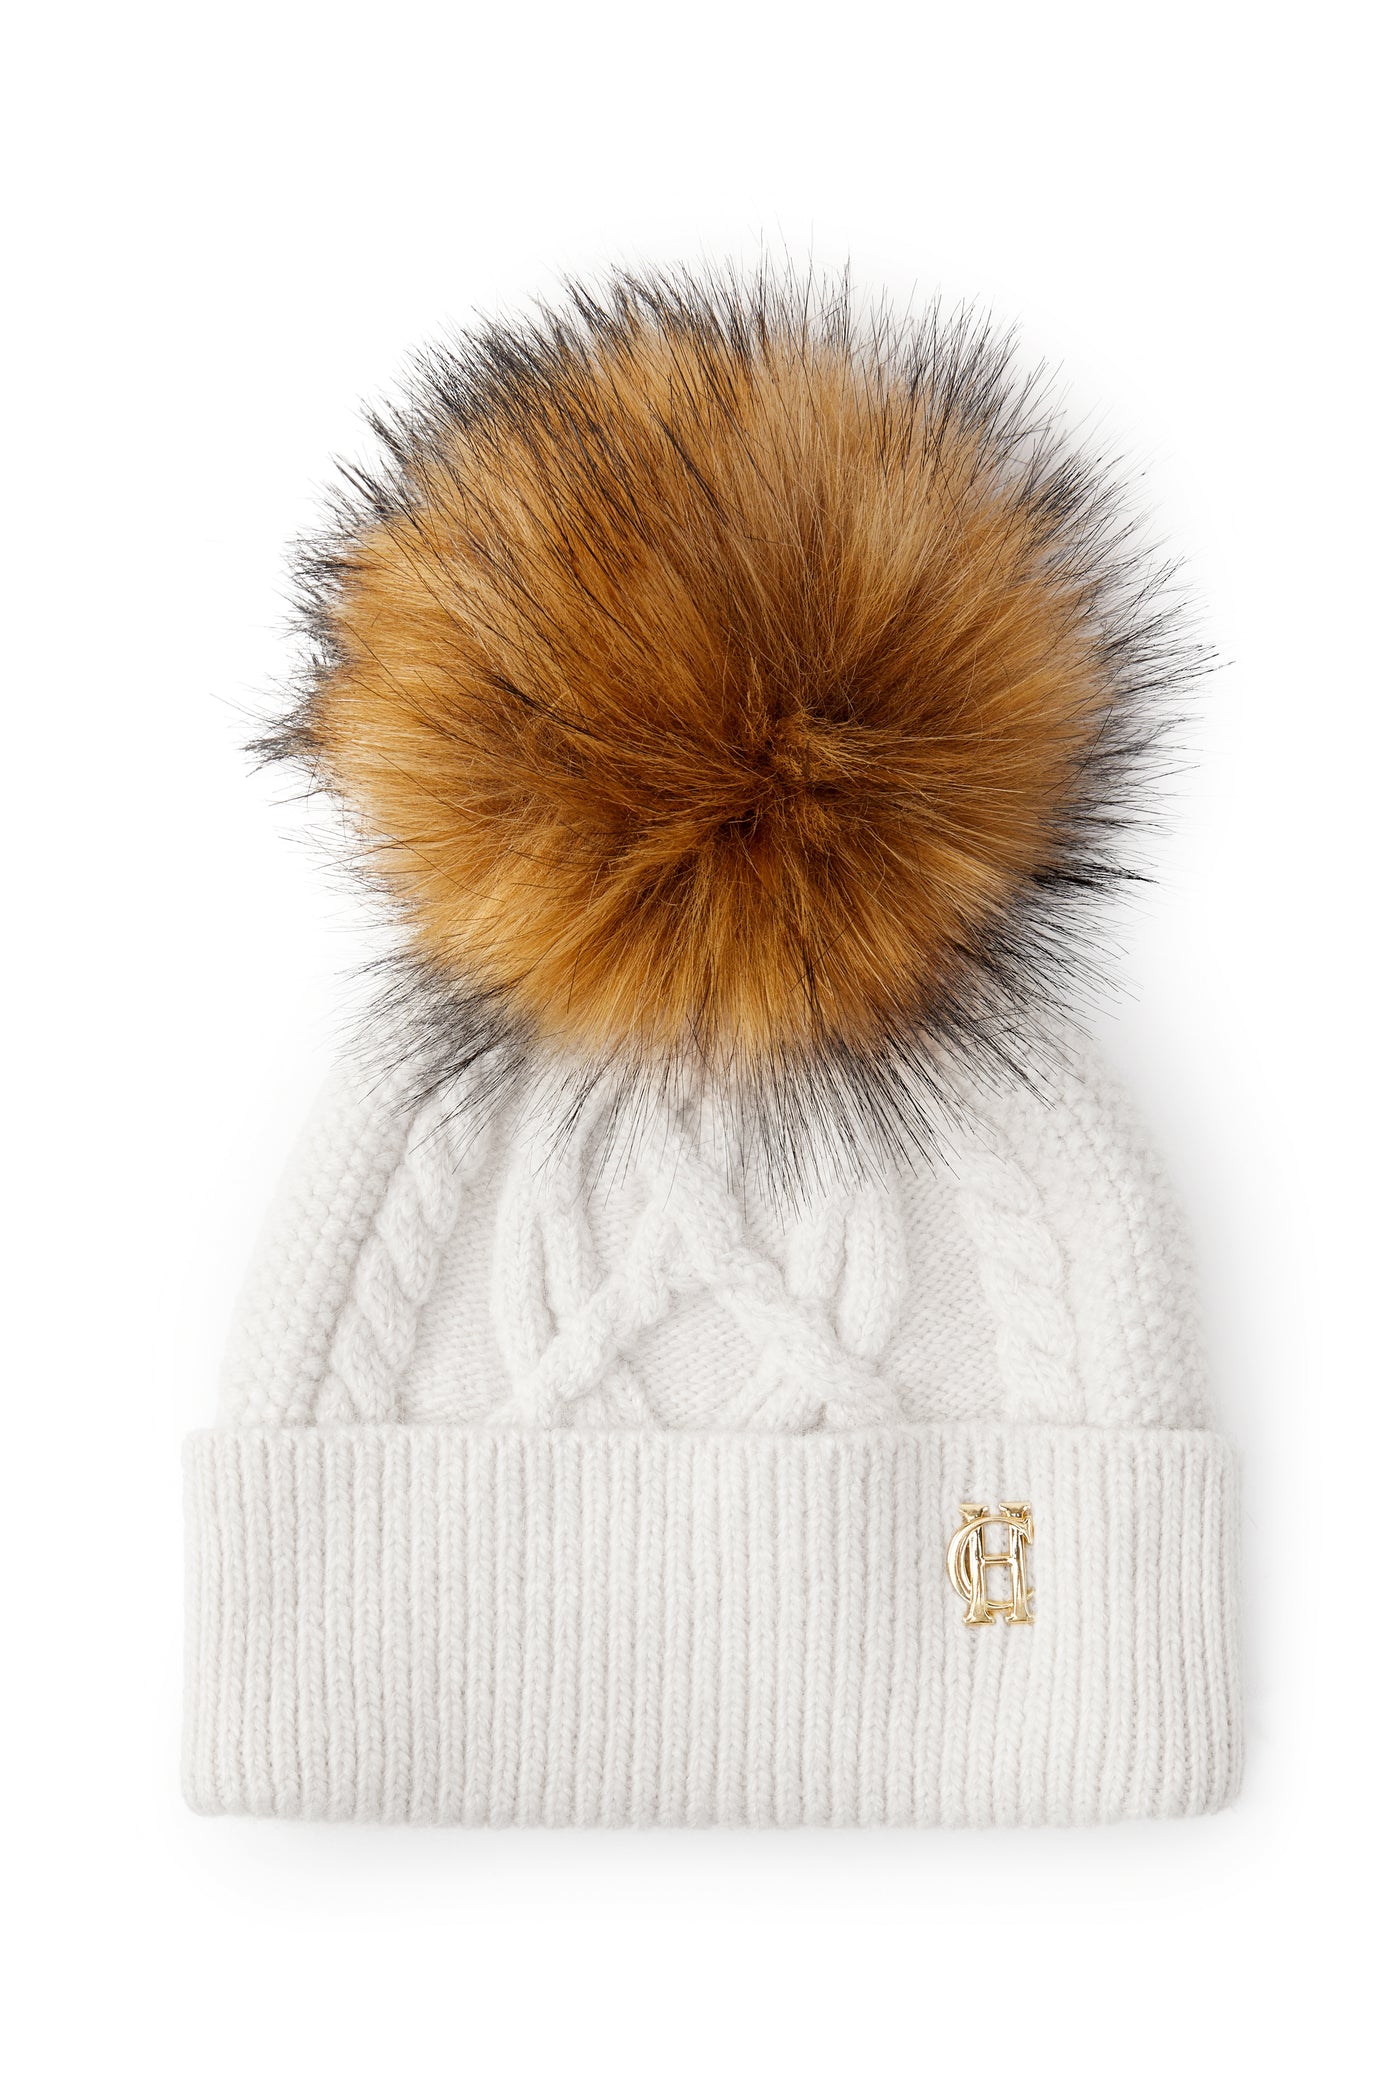 Holland Cooper Cortina Ladies Bobble Hat in Oatmeal Front